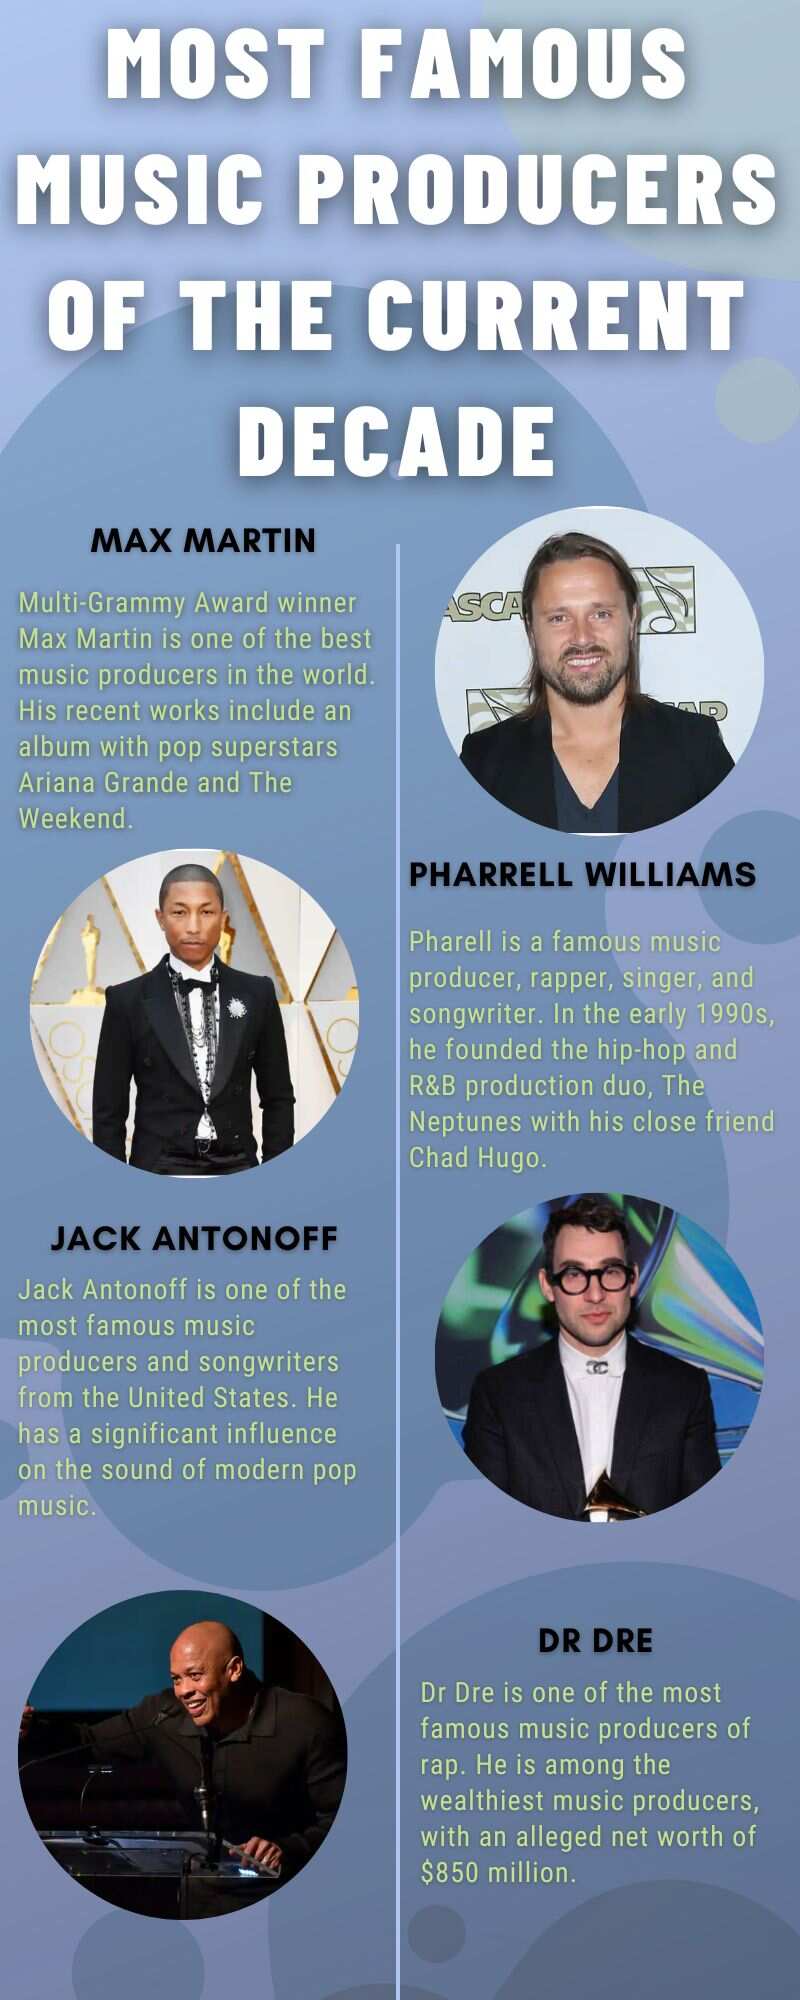 Most famous music producers